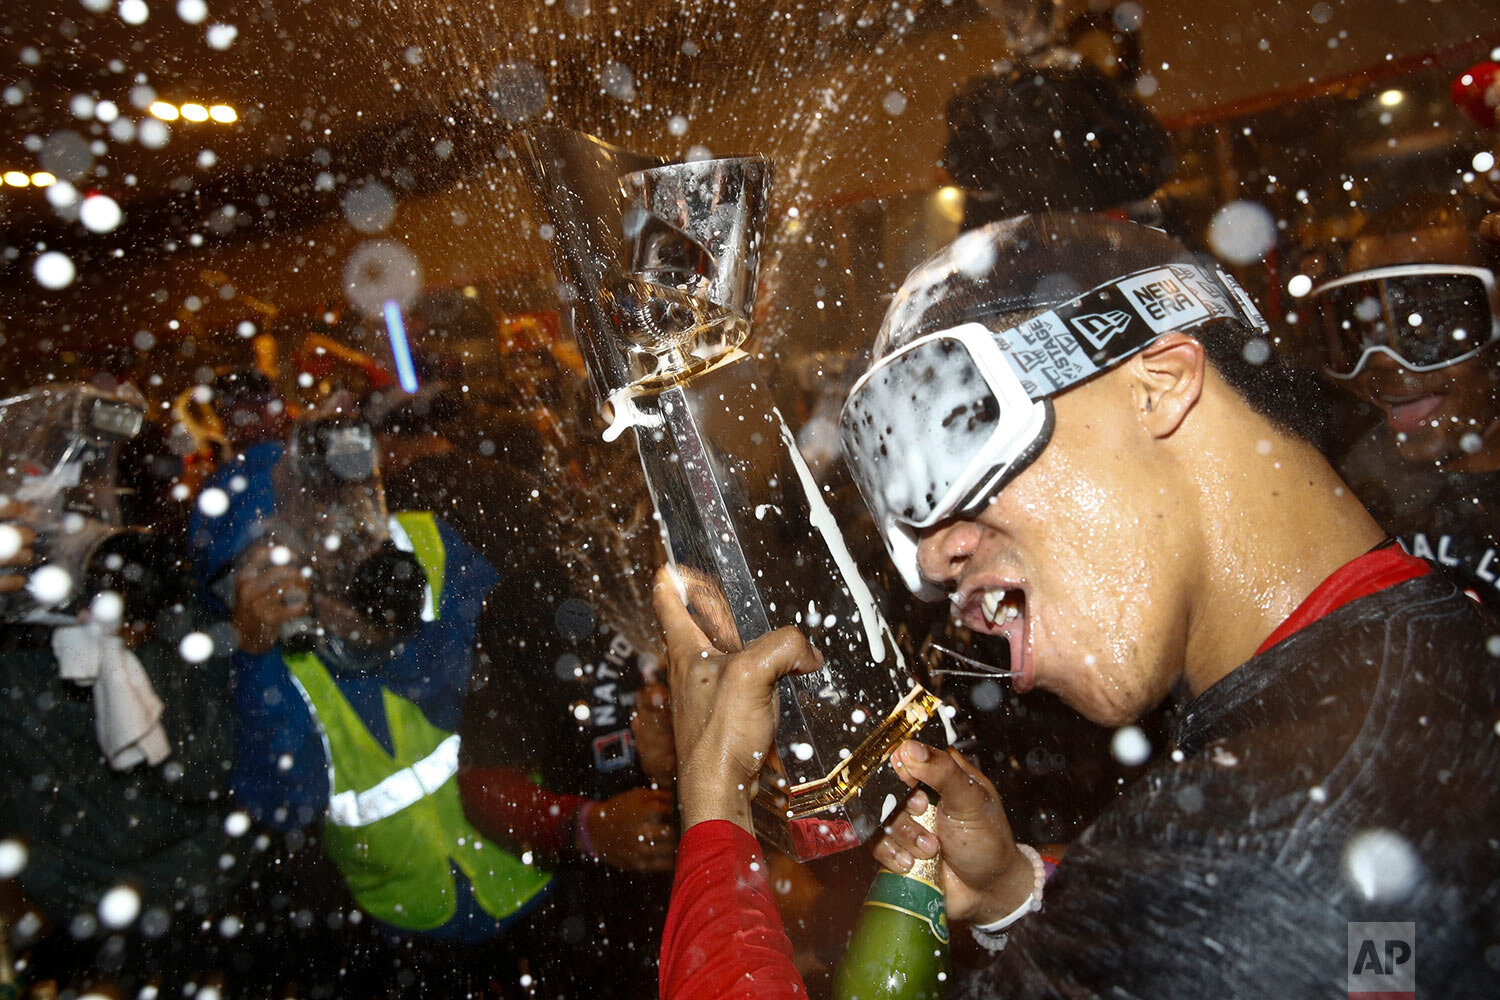  Washington Nationals' Juan Soto celebrates after Game 4 of the baseball National League Championship Series against the St. Louis Cardinals Wednesday, Oct. 16, 2019, in Washington. The Nationals won 7-4 to win the series 4-0. (AP Photo/Patrick Seman